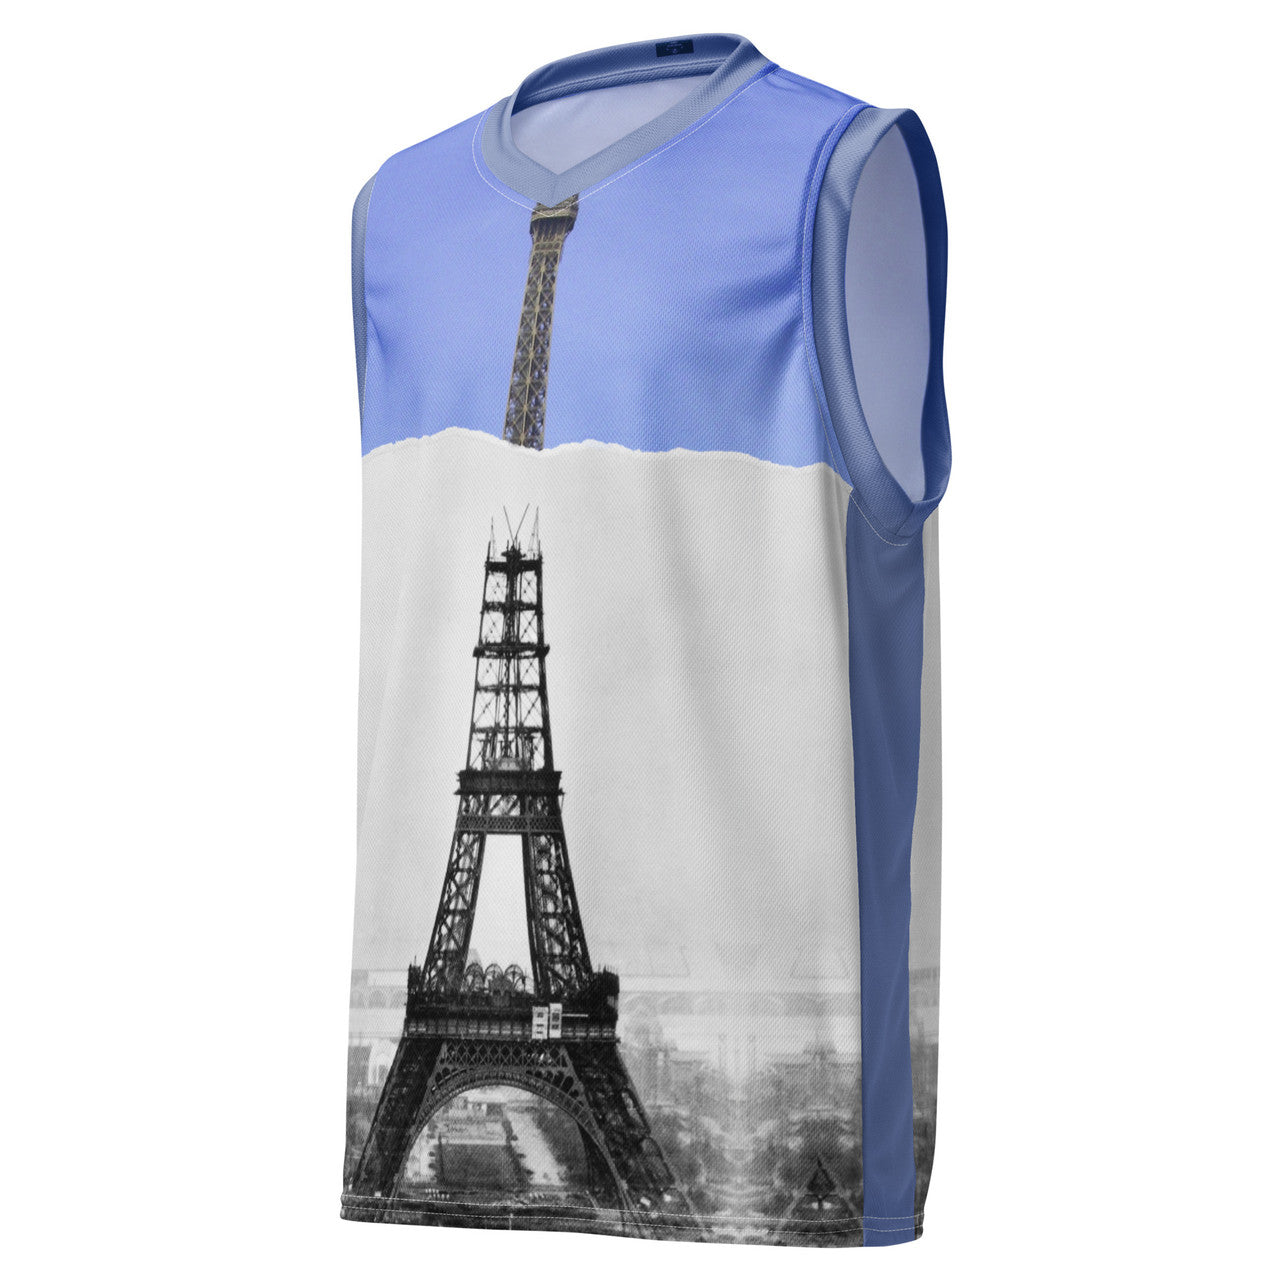 Eiffel Tower KiSS Recycled unisex basketball jersey - Construction France then and now